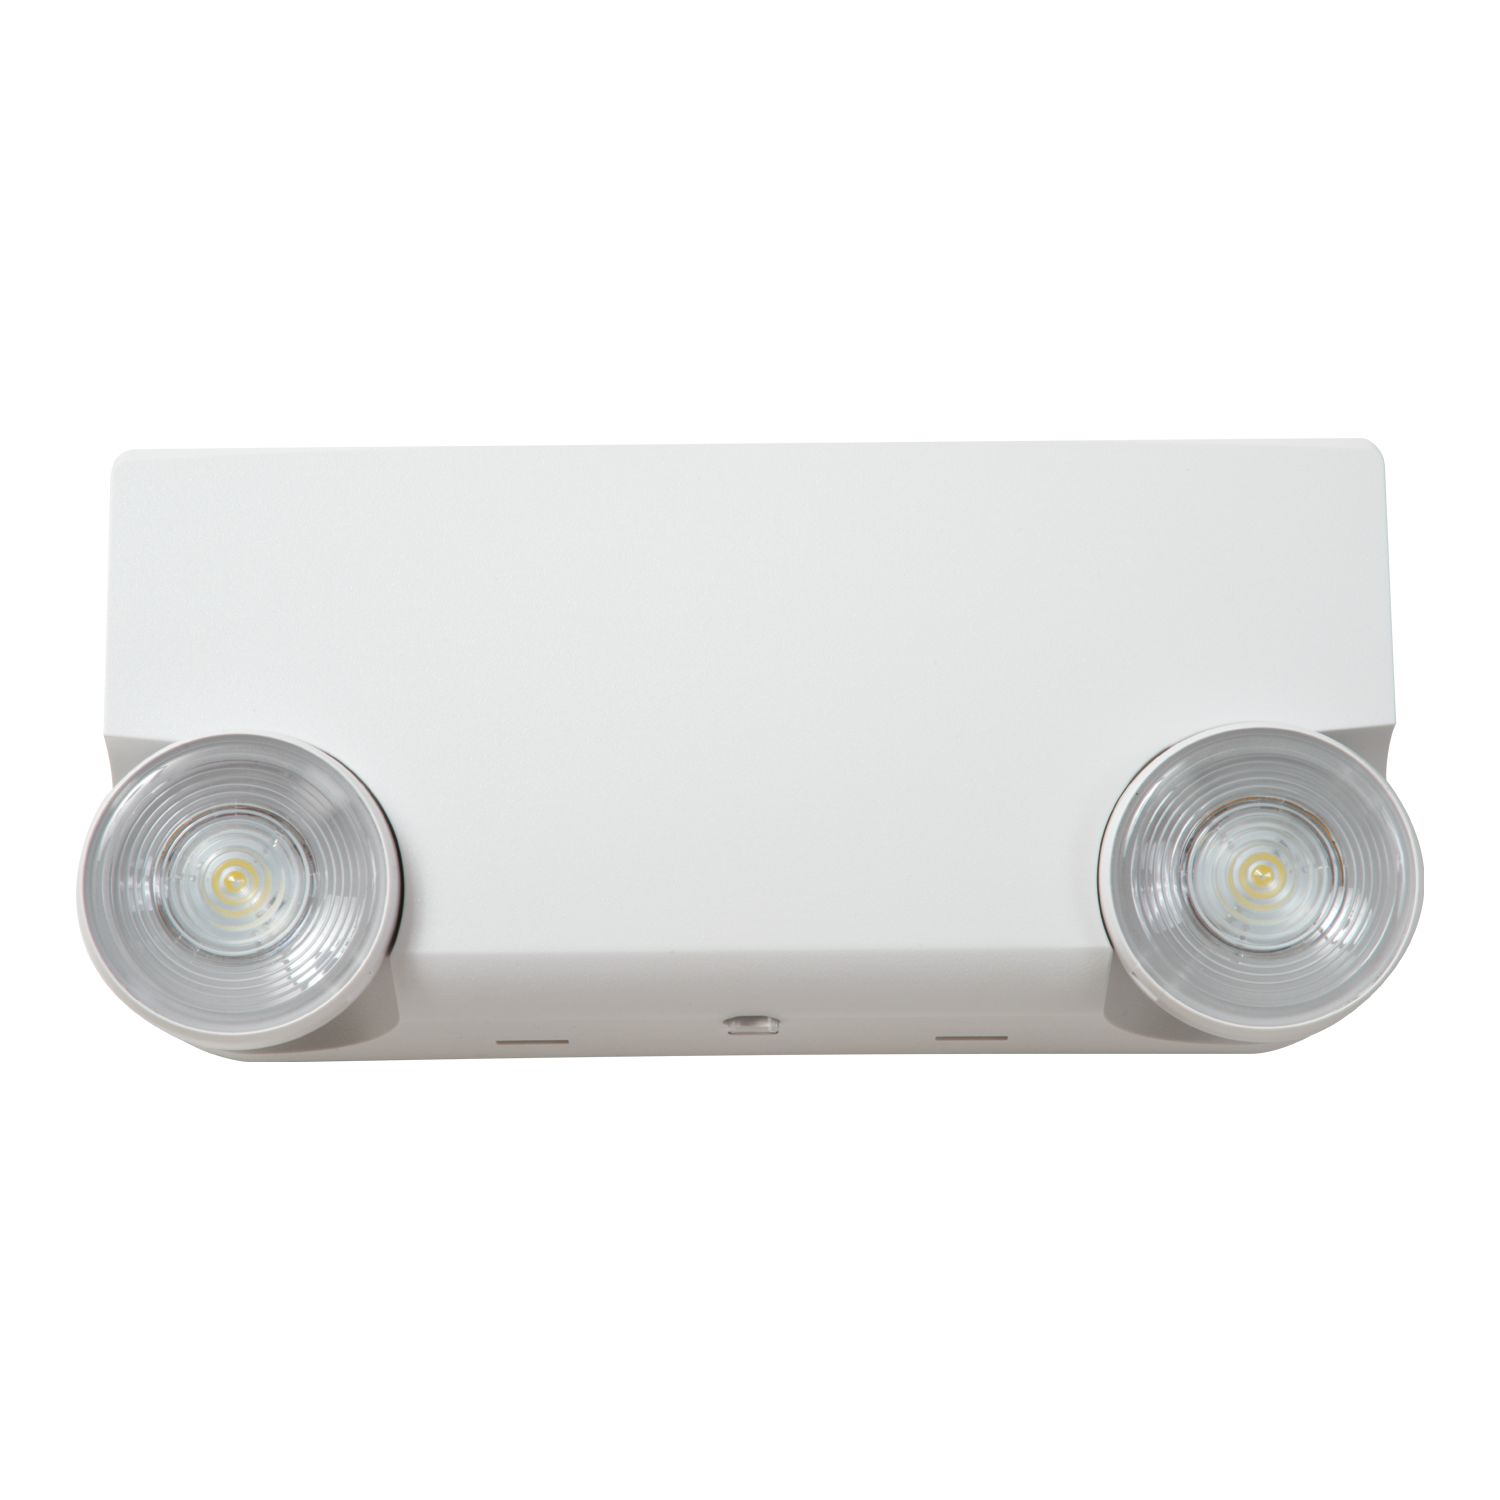 Details about   Cooper Lighting 120V 60hz 20A White *FREE SHIPPING* 